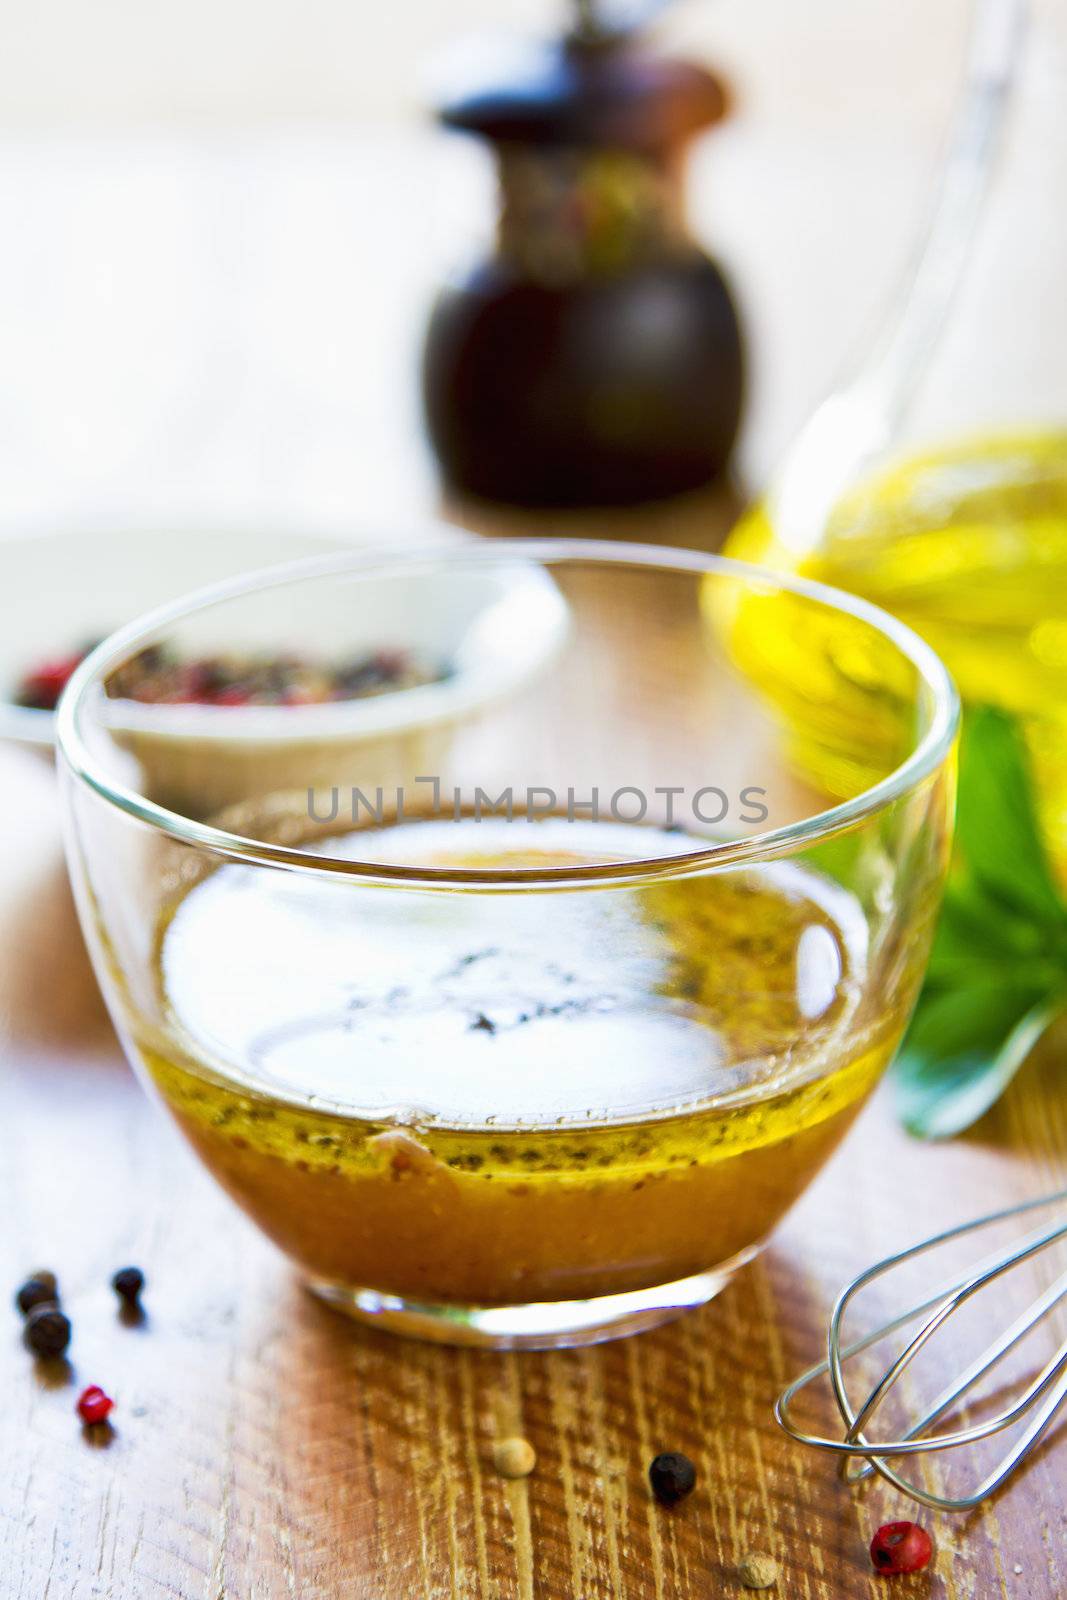 Homemade salad dressing by vanillaechoes